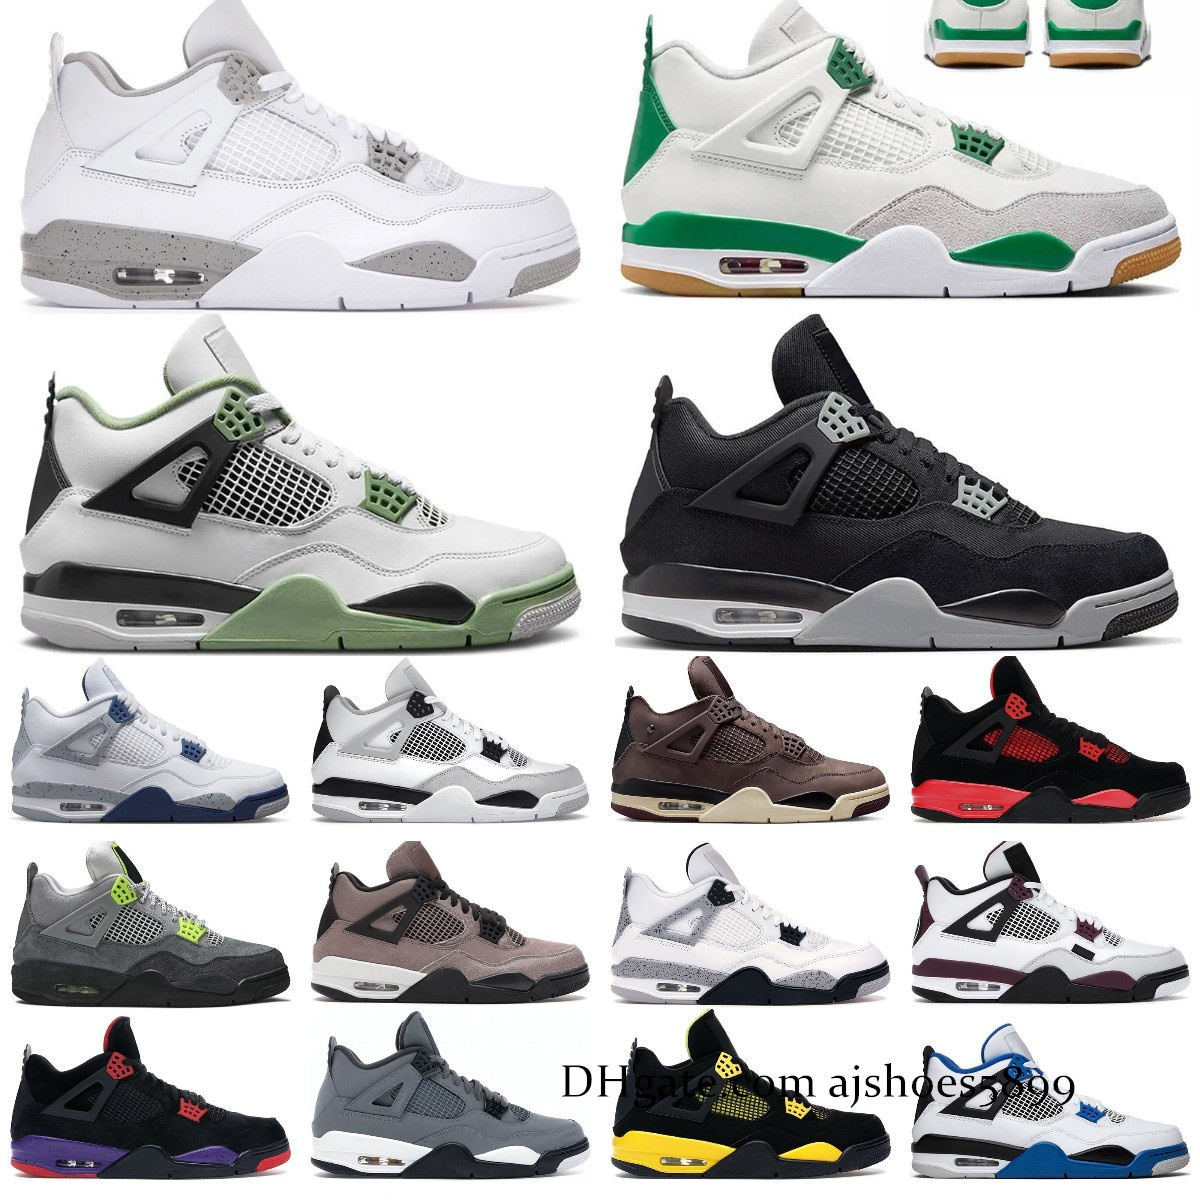 

Jumpman 4 Basketball Shoes 4s Military Black Cat Seafoam Red Thunder Cement Sail Violet Ore Midnight Navy Tech White Oreo Pine Green Mens Womens Sneakers Trainers, Bubble column